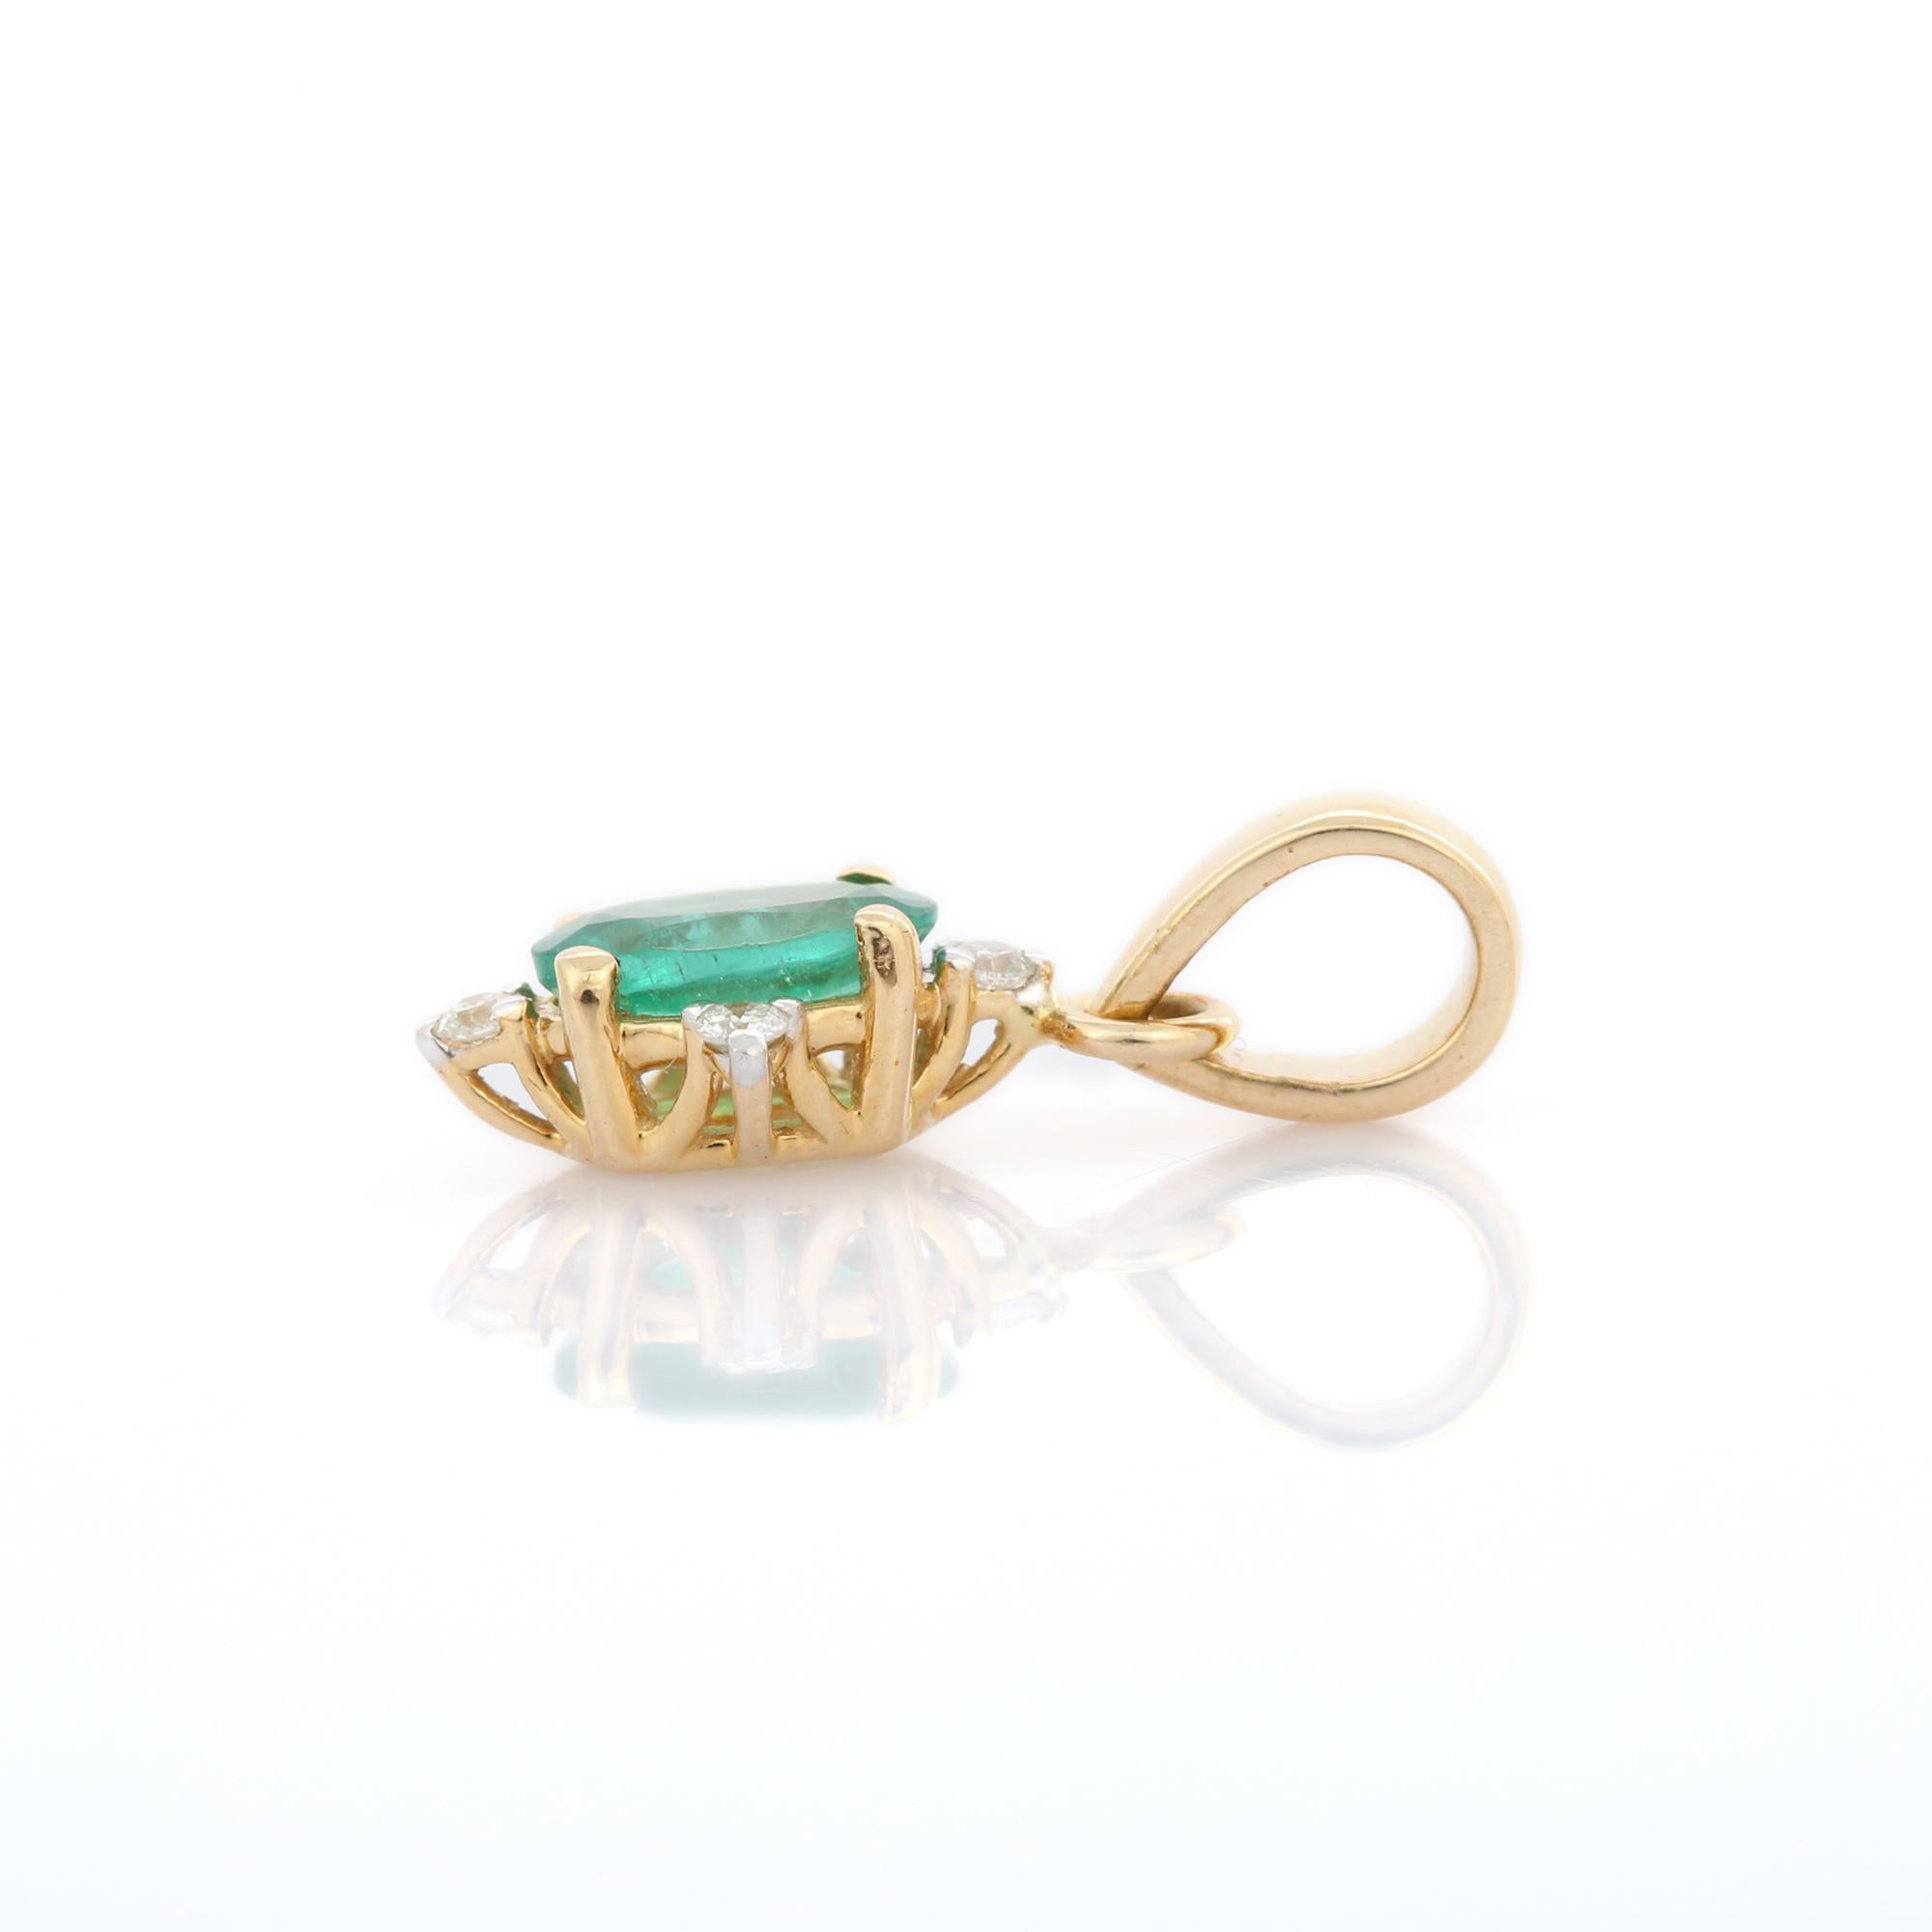 Natural Emerald pendant in 14K Gold. It has a oval cut emerald studded with diamonds that completes your look with a decent touch. Pendants are used to wear or gifted to represent love and promises. It's an attractive jewelry piece that goes with